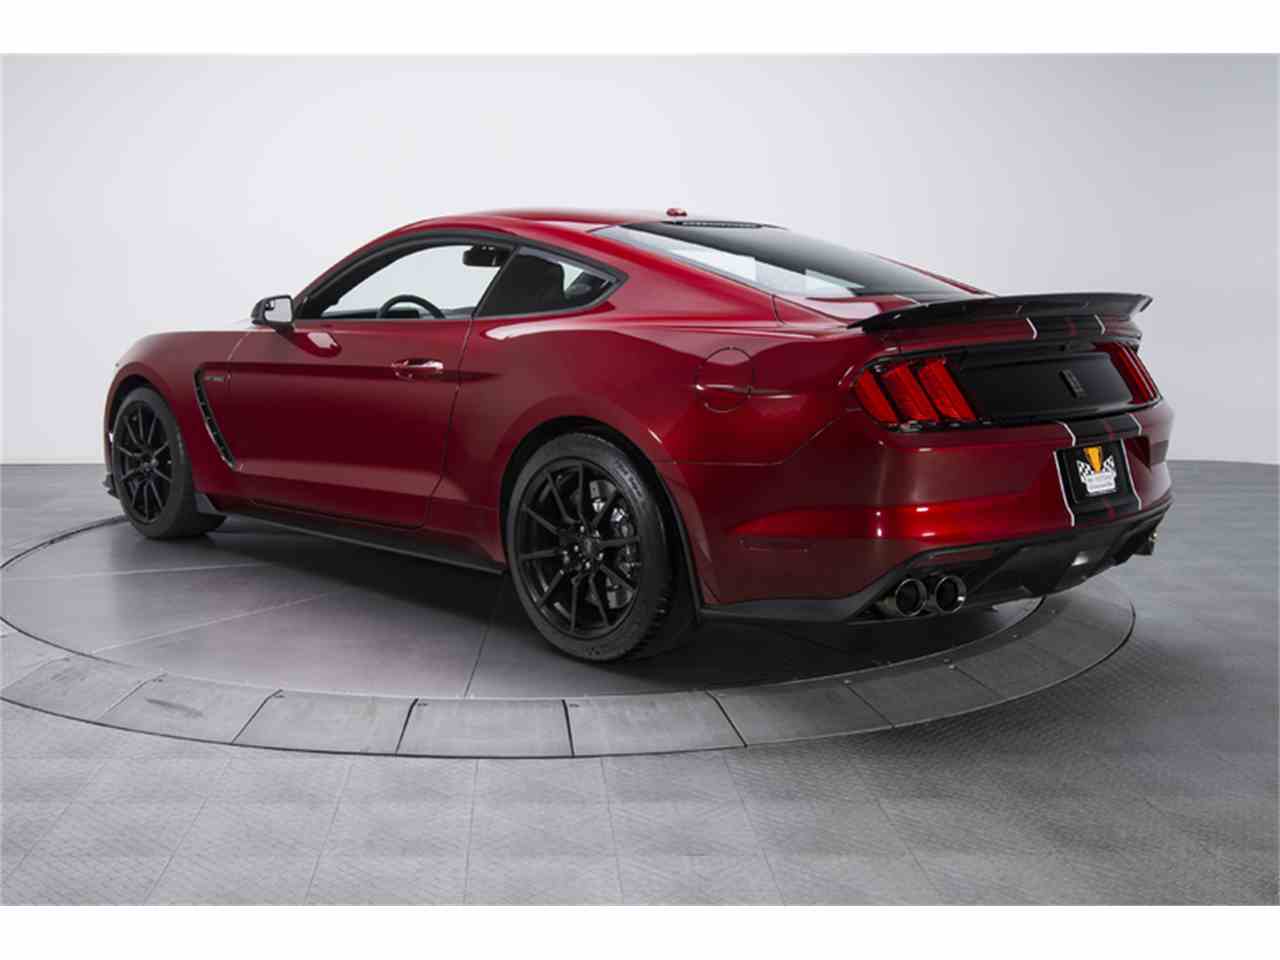 2017 Ford Mustang GT350 for Sale | ClassicCars.com | CC-980625